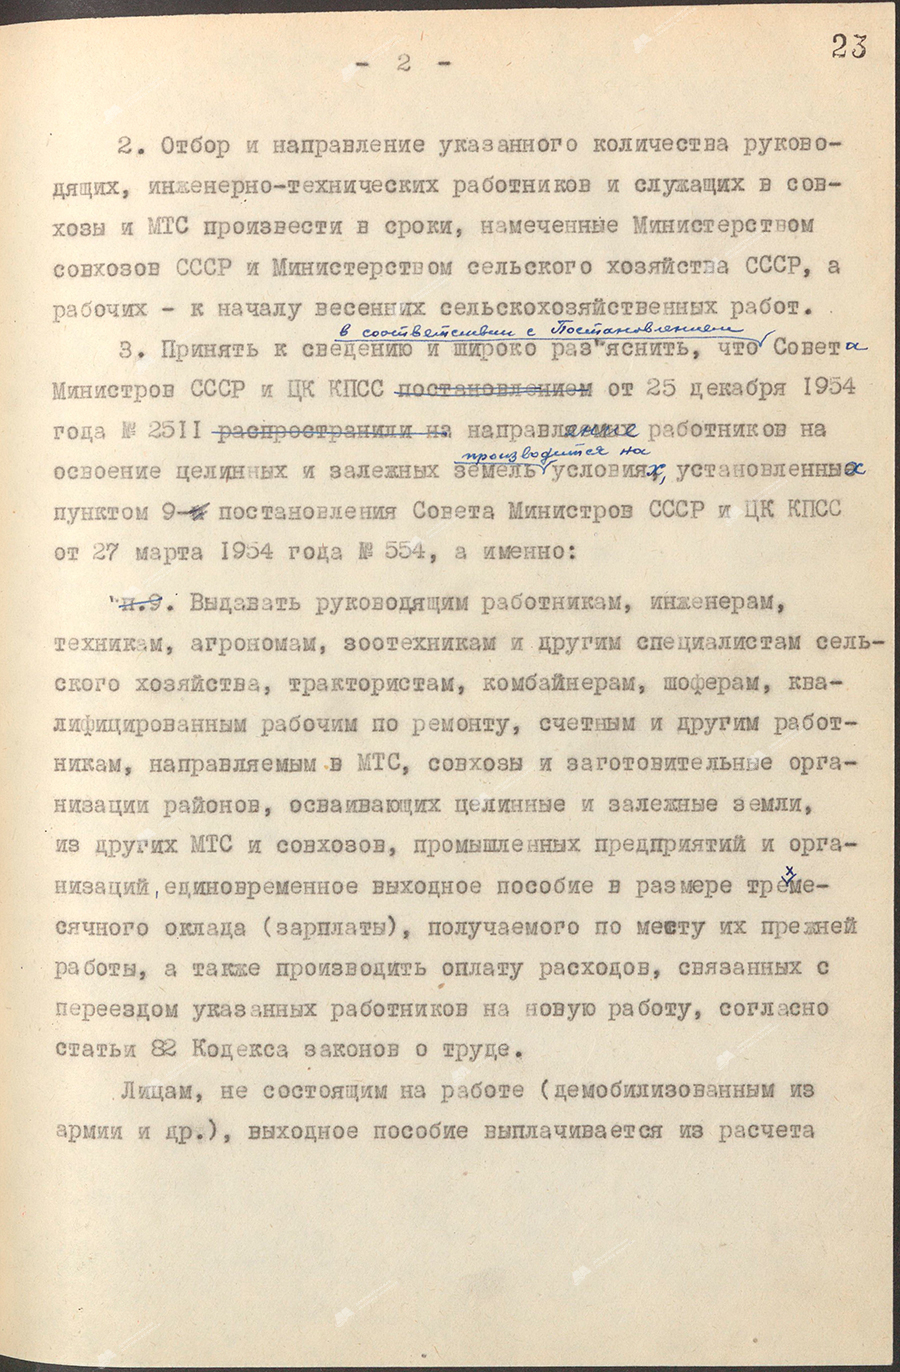 Resolution No. 5 of the Council of Ministers of the BSSR and the Central Committee of the Communist Party of Belarus «On the selection and assignment of workers, engineering and technical workers and employees to work in MTS and state farms in the areas of development of virgin and fallow lands of the RSFSR and Kazakhstan»-стр. 1